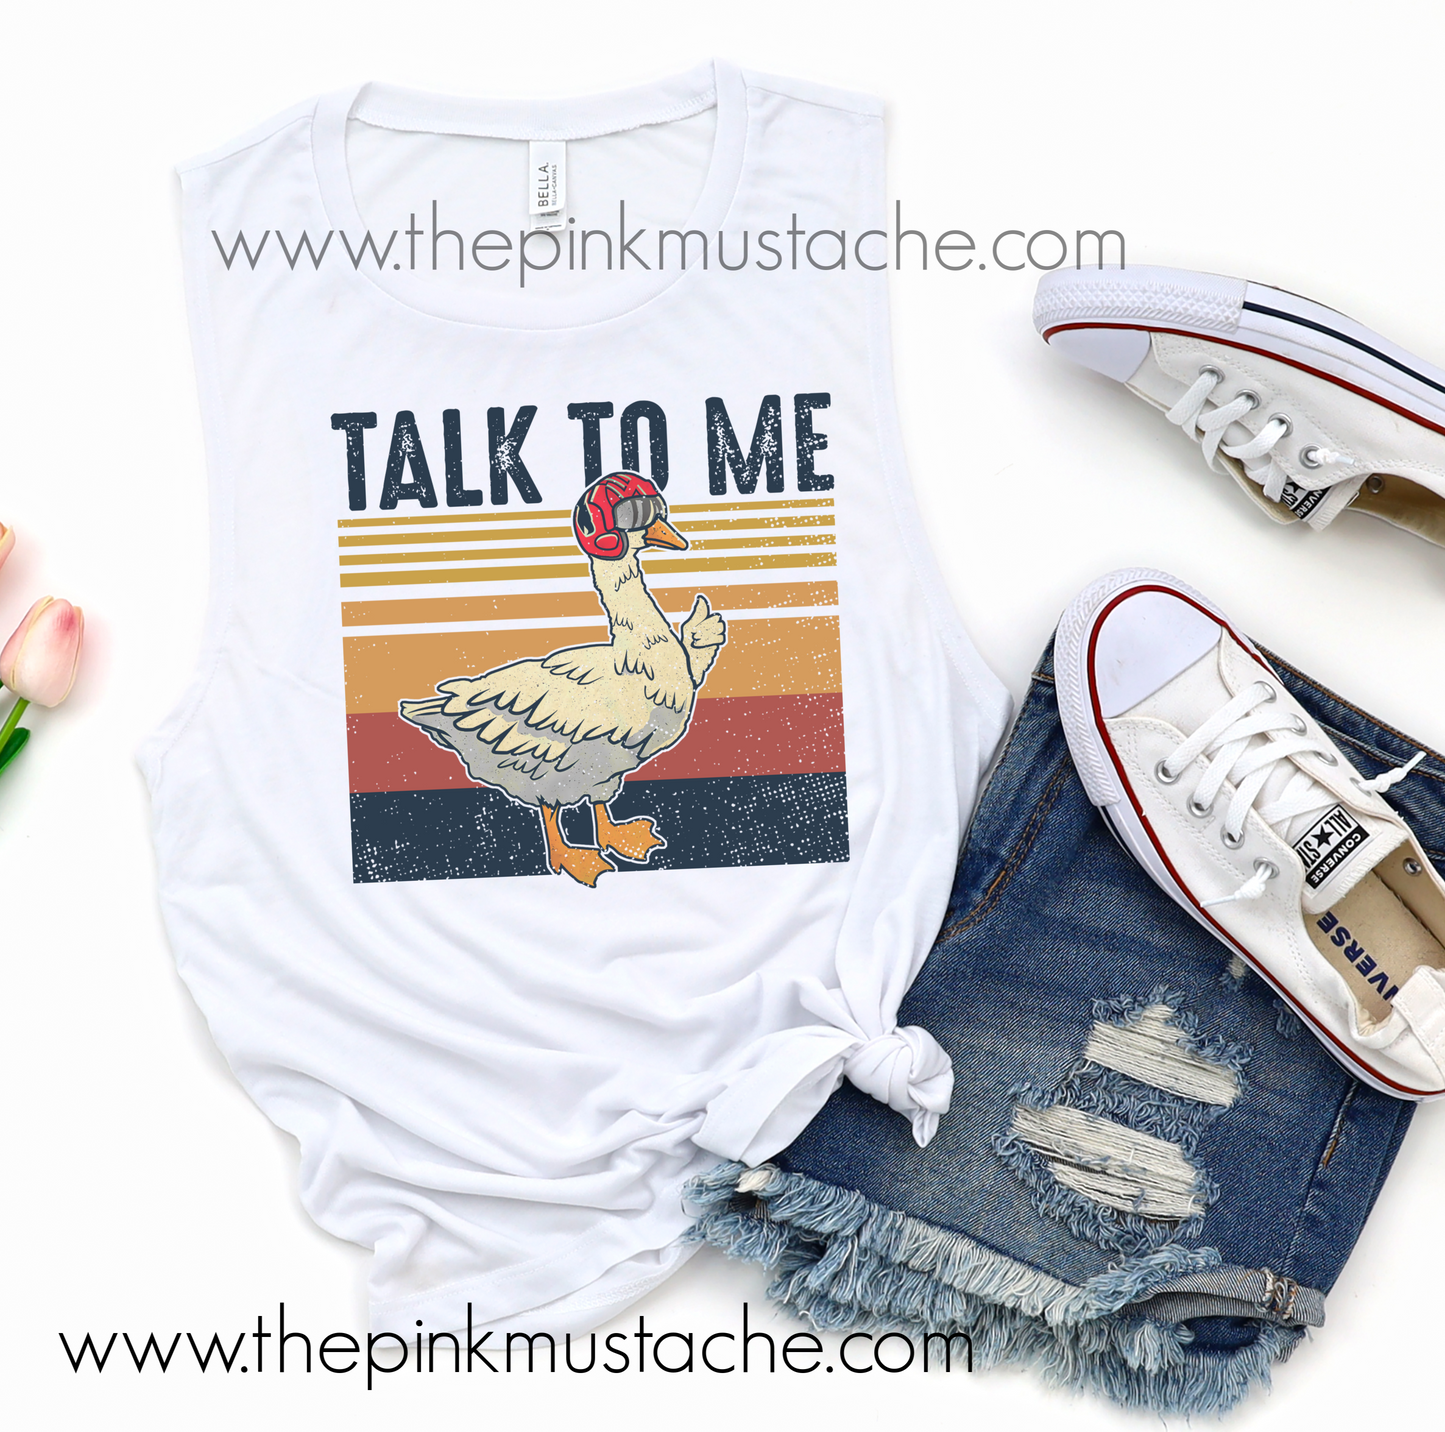 Talk To Me Goose Funny Muscle Tank Top - MENS AND WOMENS SIZES AVAILABLE/ Top Gun Inspired Tank/ Maverick Goose / Aviators Tank - Top Gun 2 Inspired